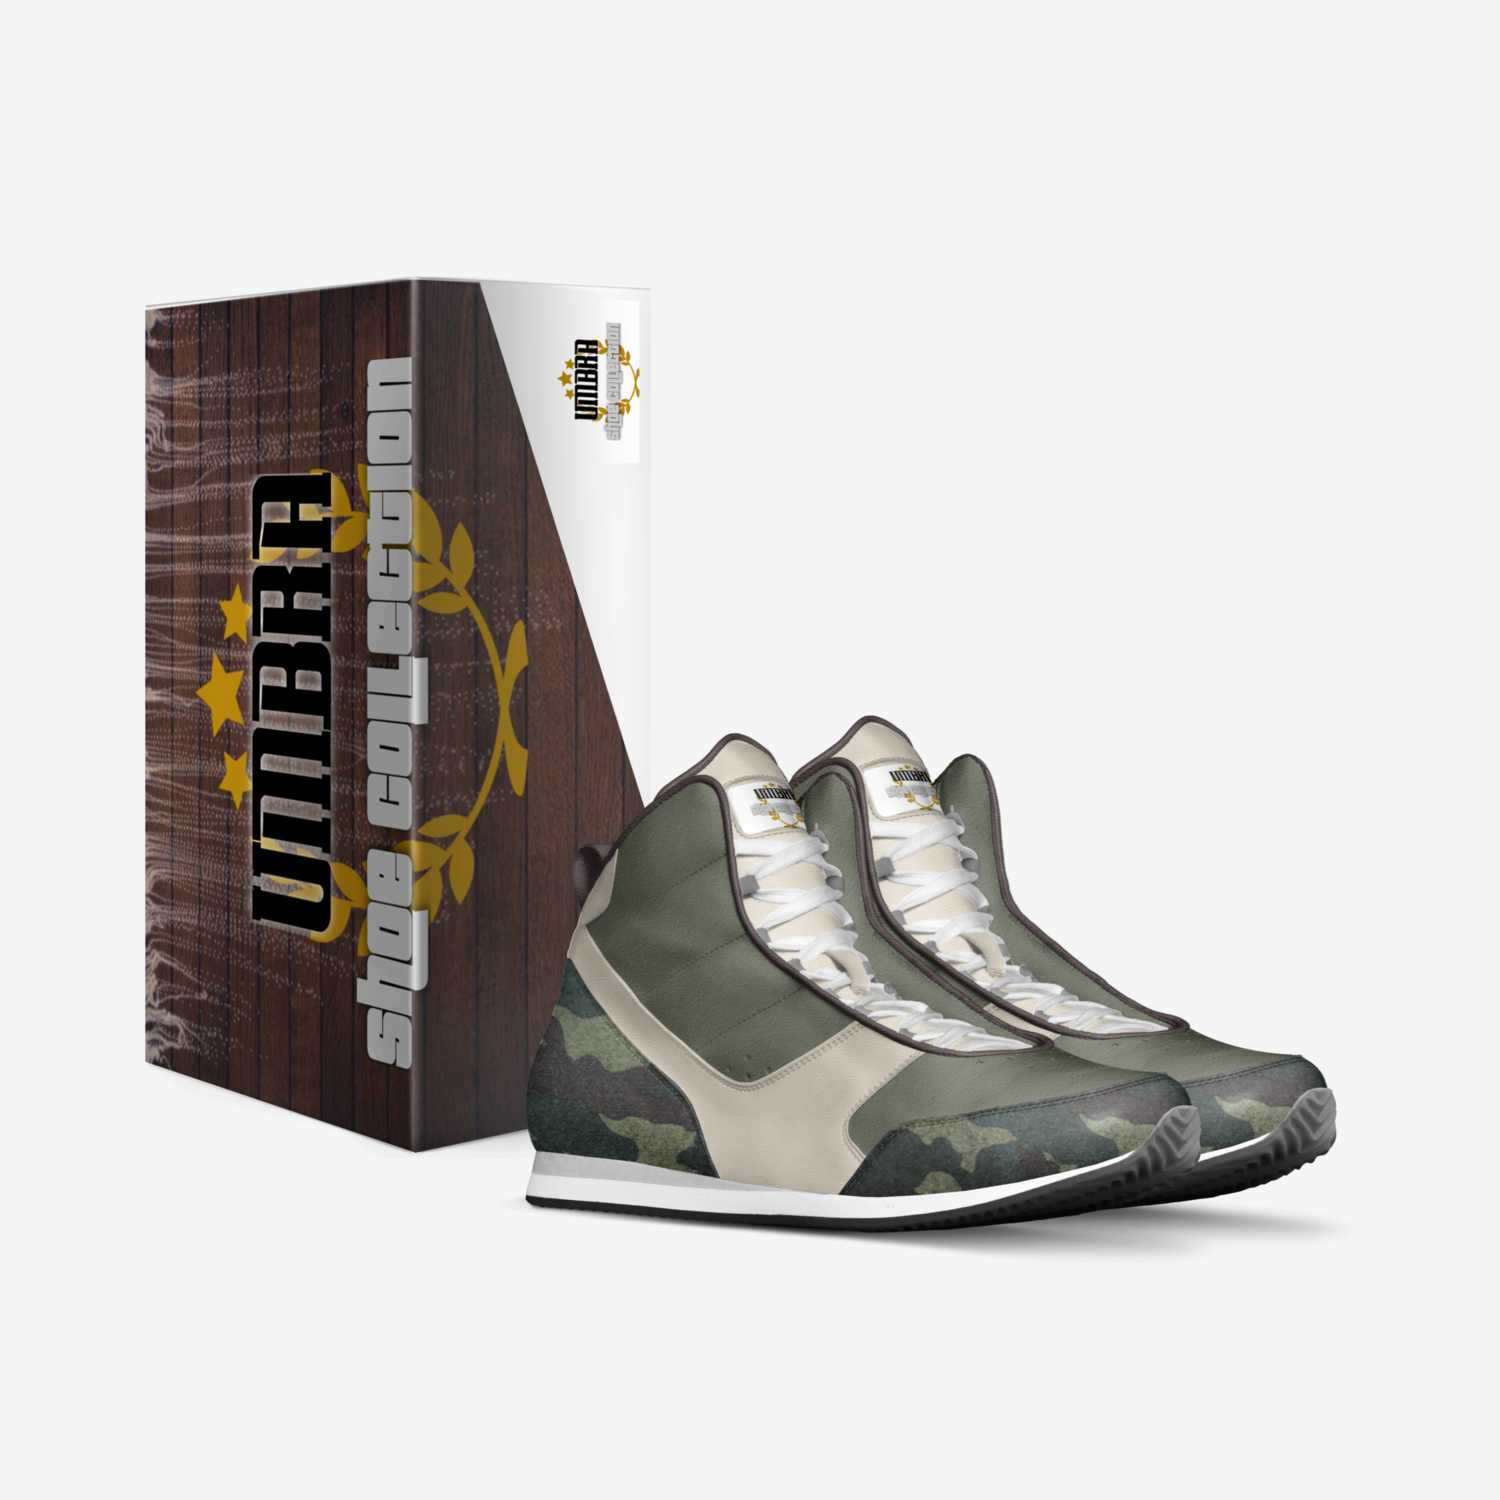 UMBRA custom made in Italy shoes by Jeremy Mosley | Box view